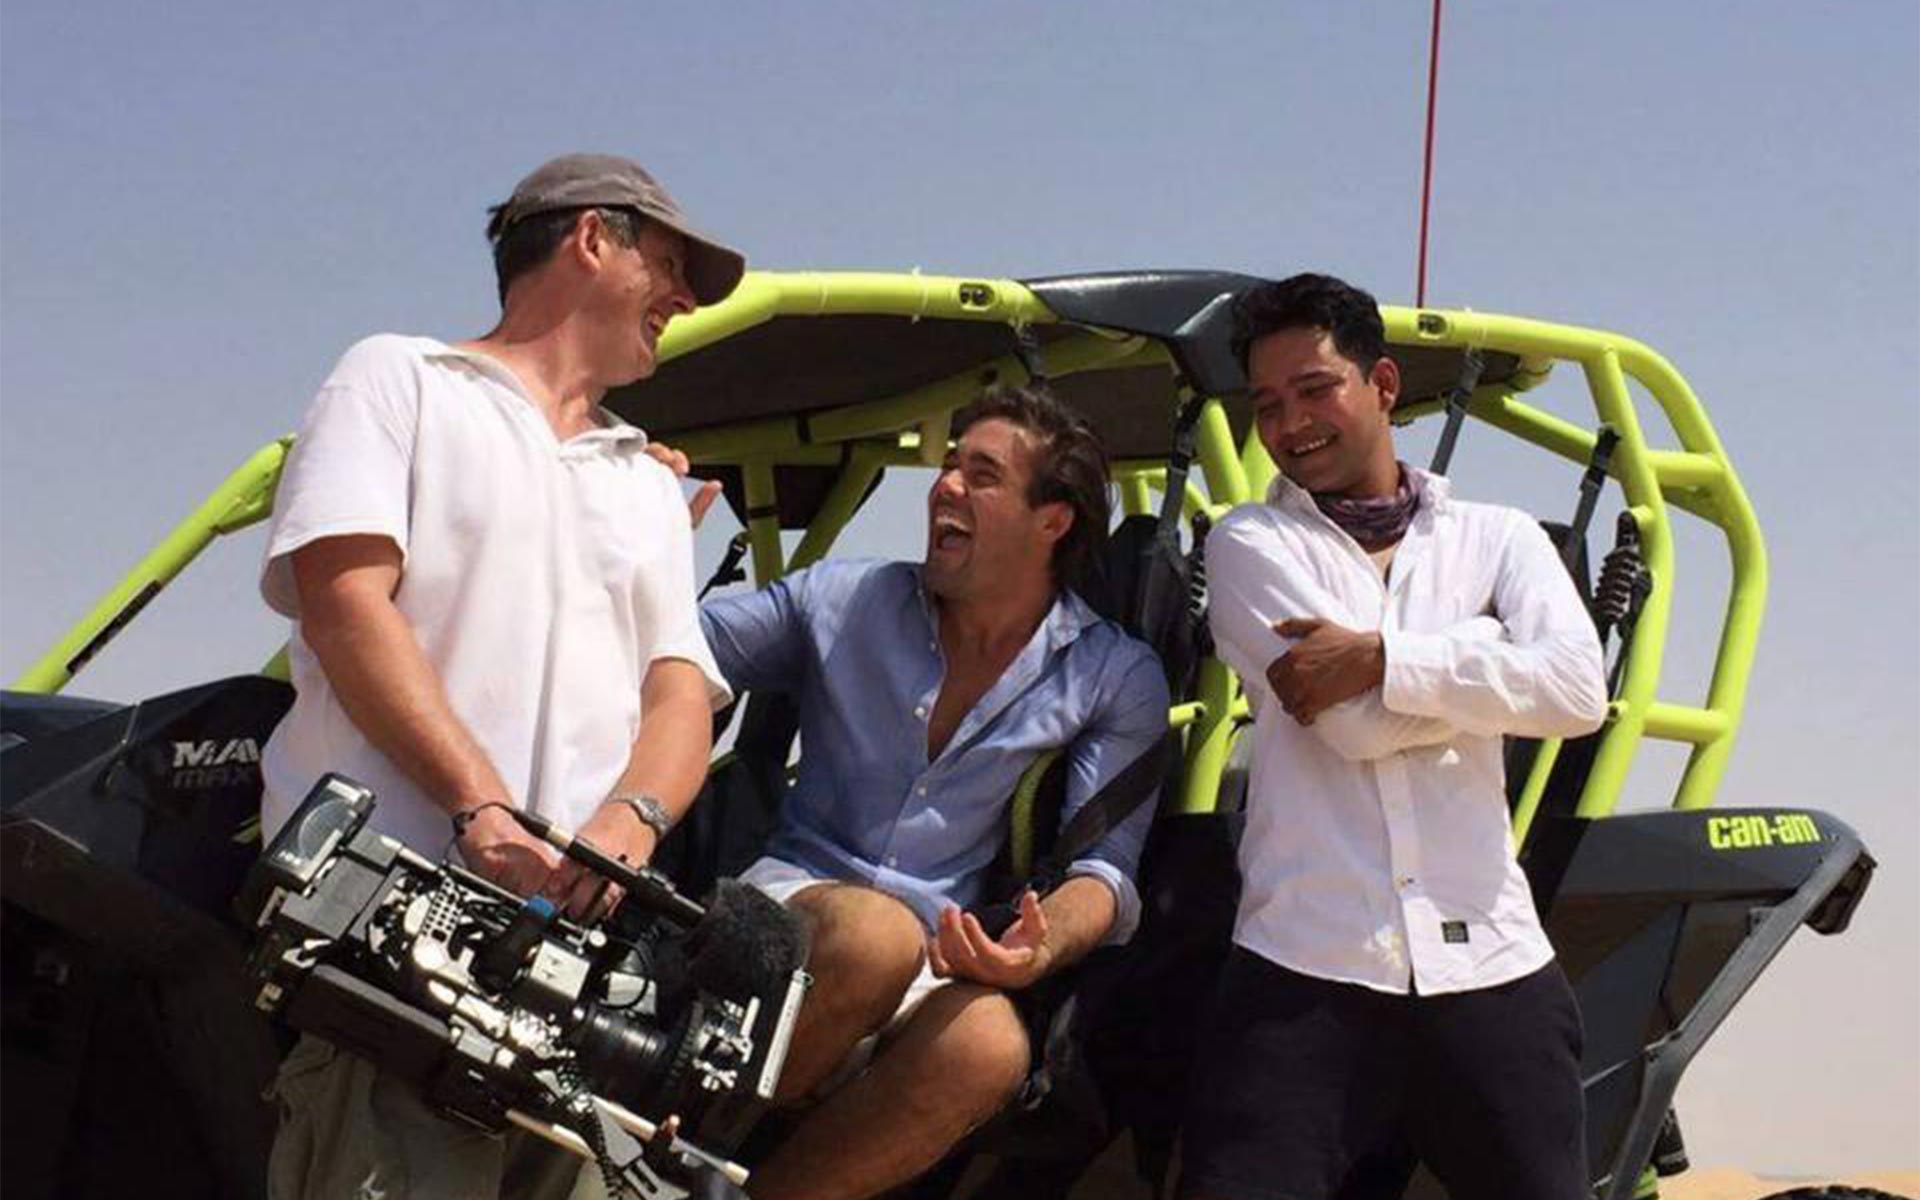 Mike Charlton and Navigation Films shooting in the UAE